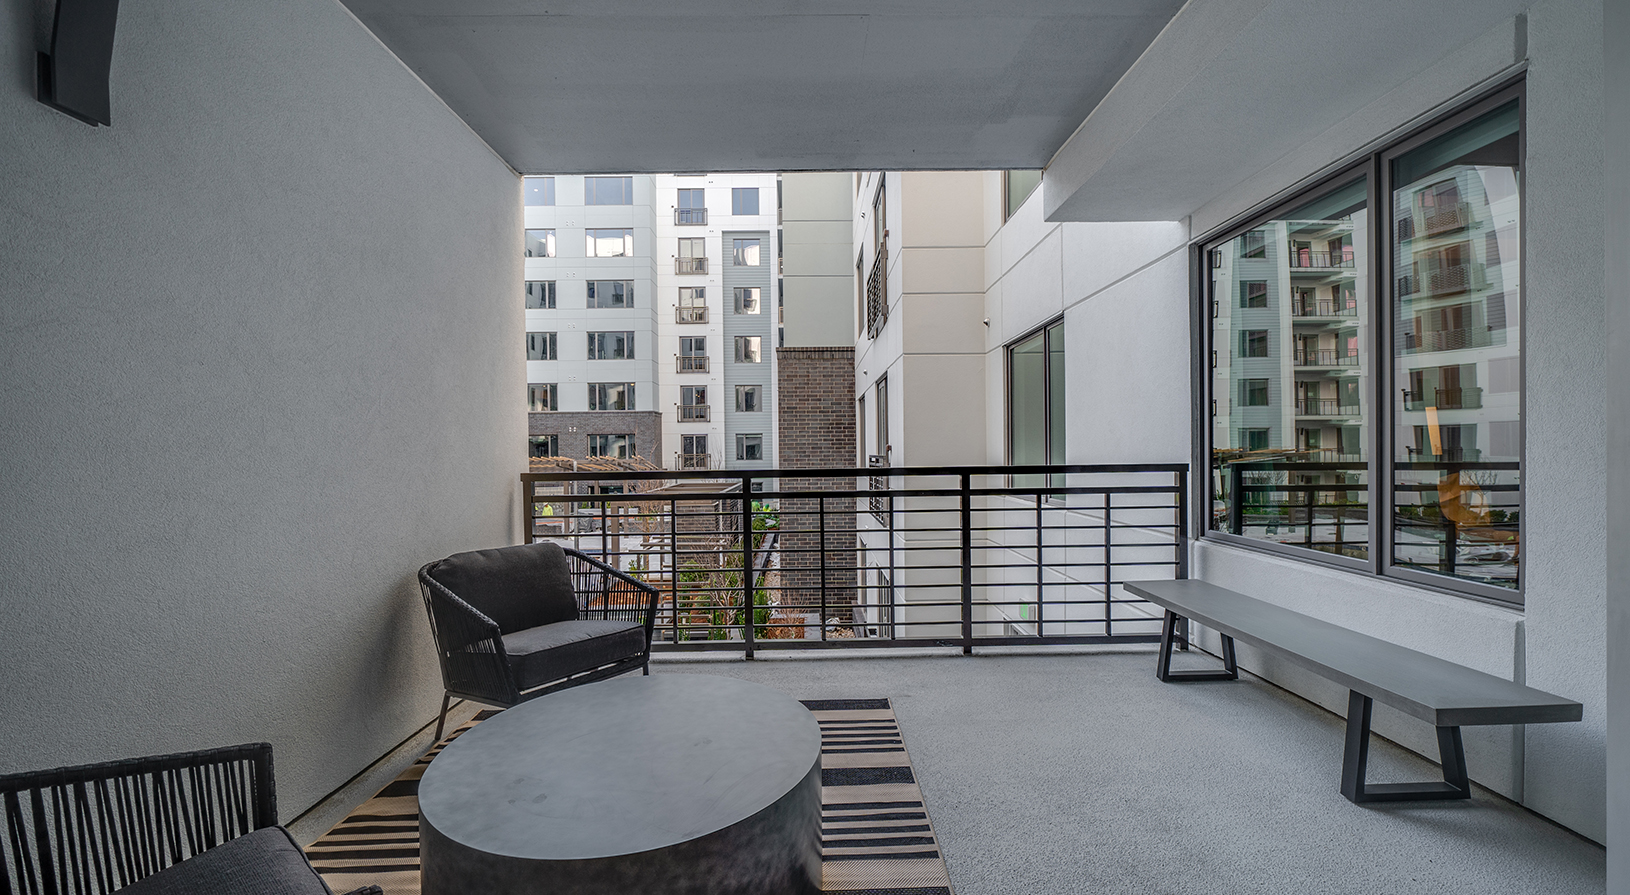 Peace Raleigh Apartments - Private Terrace with bench and view of surrounding apartments beyond the courtyard